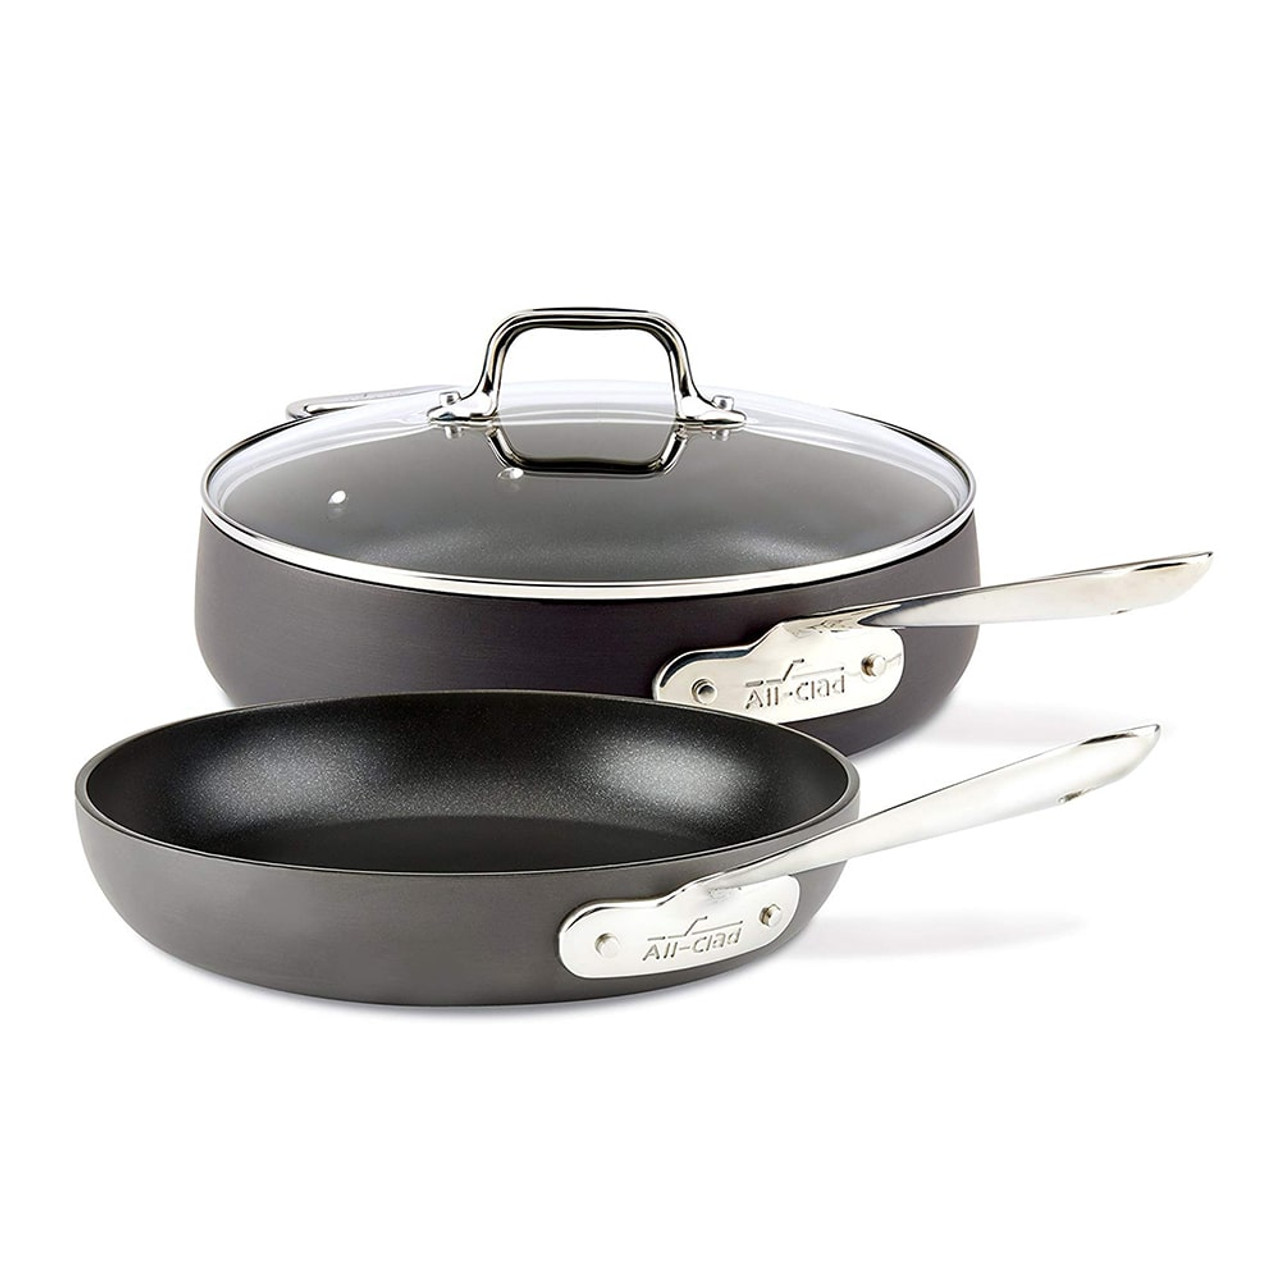 https://cdn11.bigcommerce.com/s-hccytny0od/images/stencil/1280x1280/products/3116/11049/all-clad-ha1-3pc-cookware-set__32577.1586961842.jpg?c=2?imbypass=on